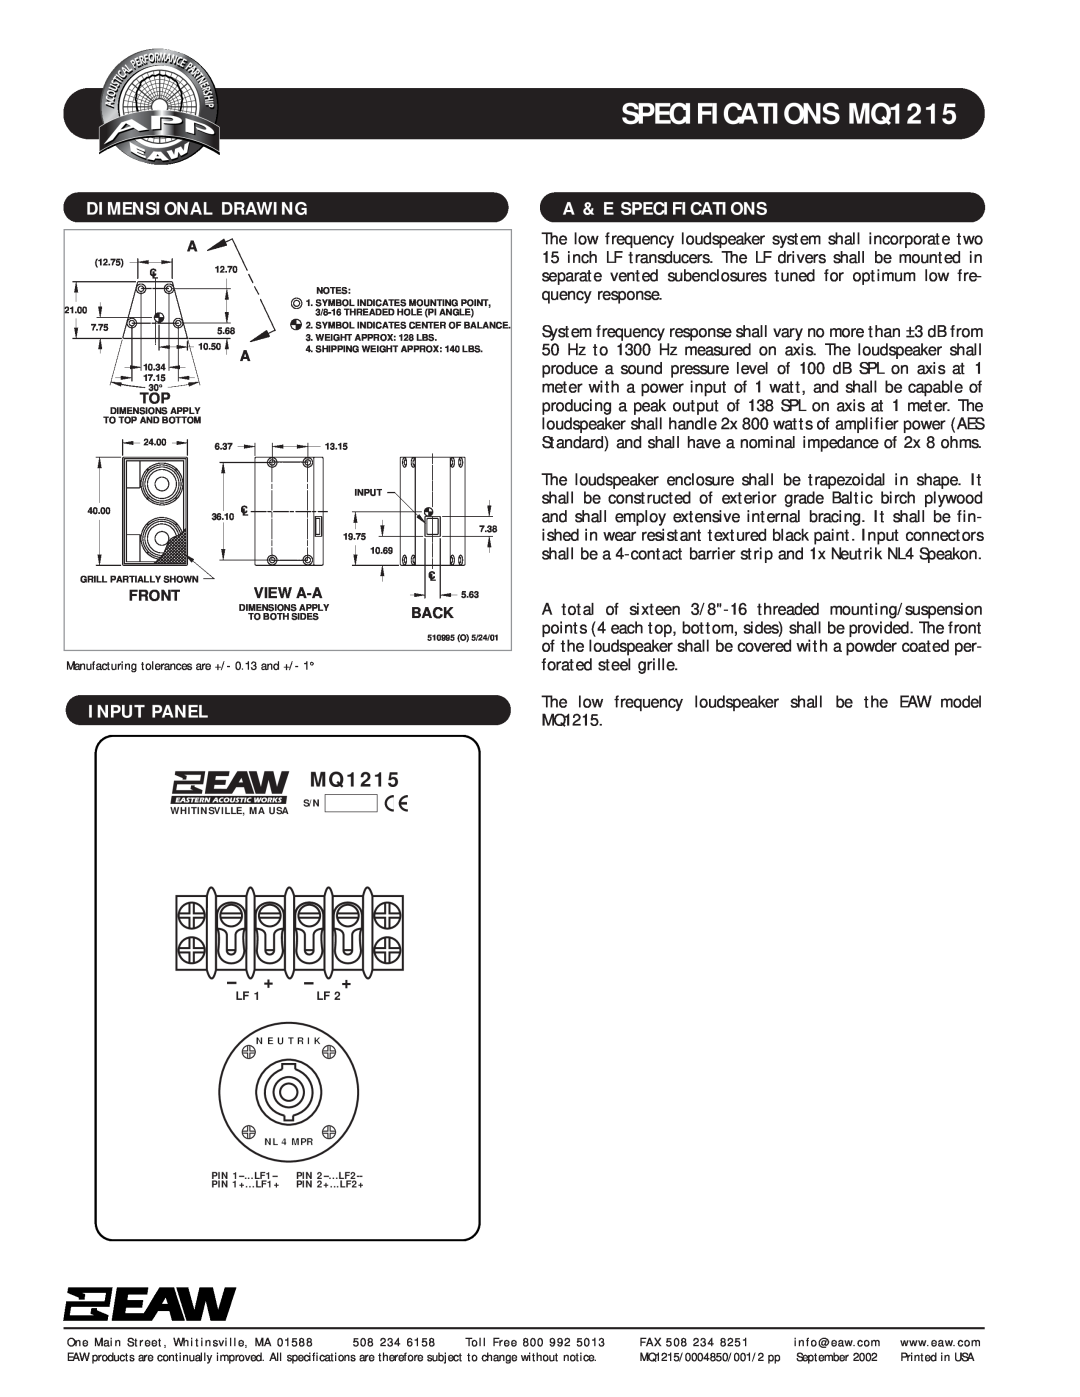 EAW specifications Dimensional Drawing, A & E Specifications, Input Panel, SPECIFICATIONS MQ1215 